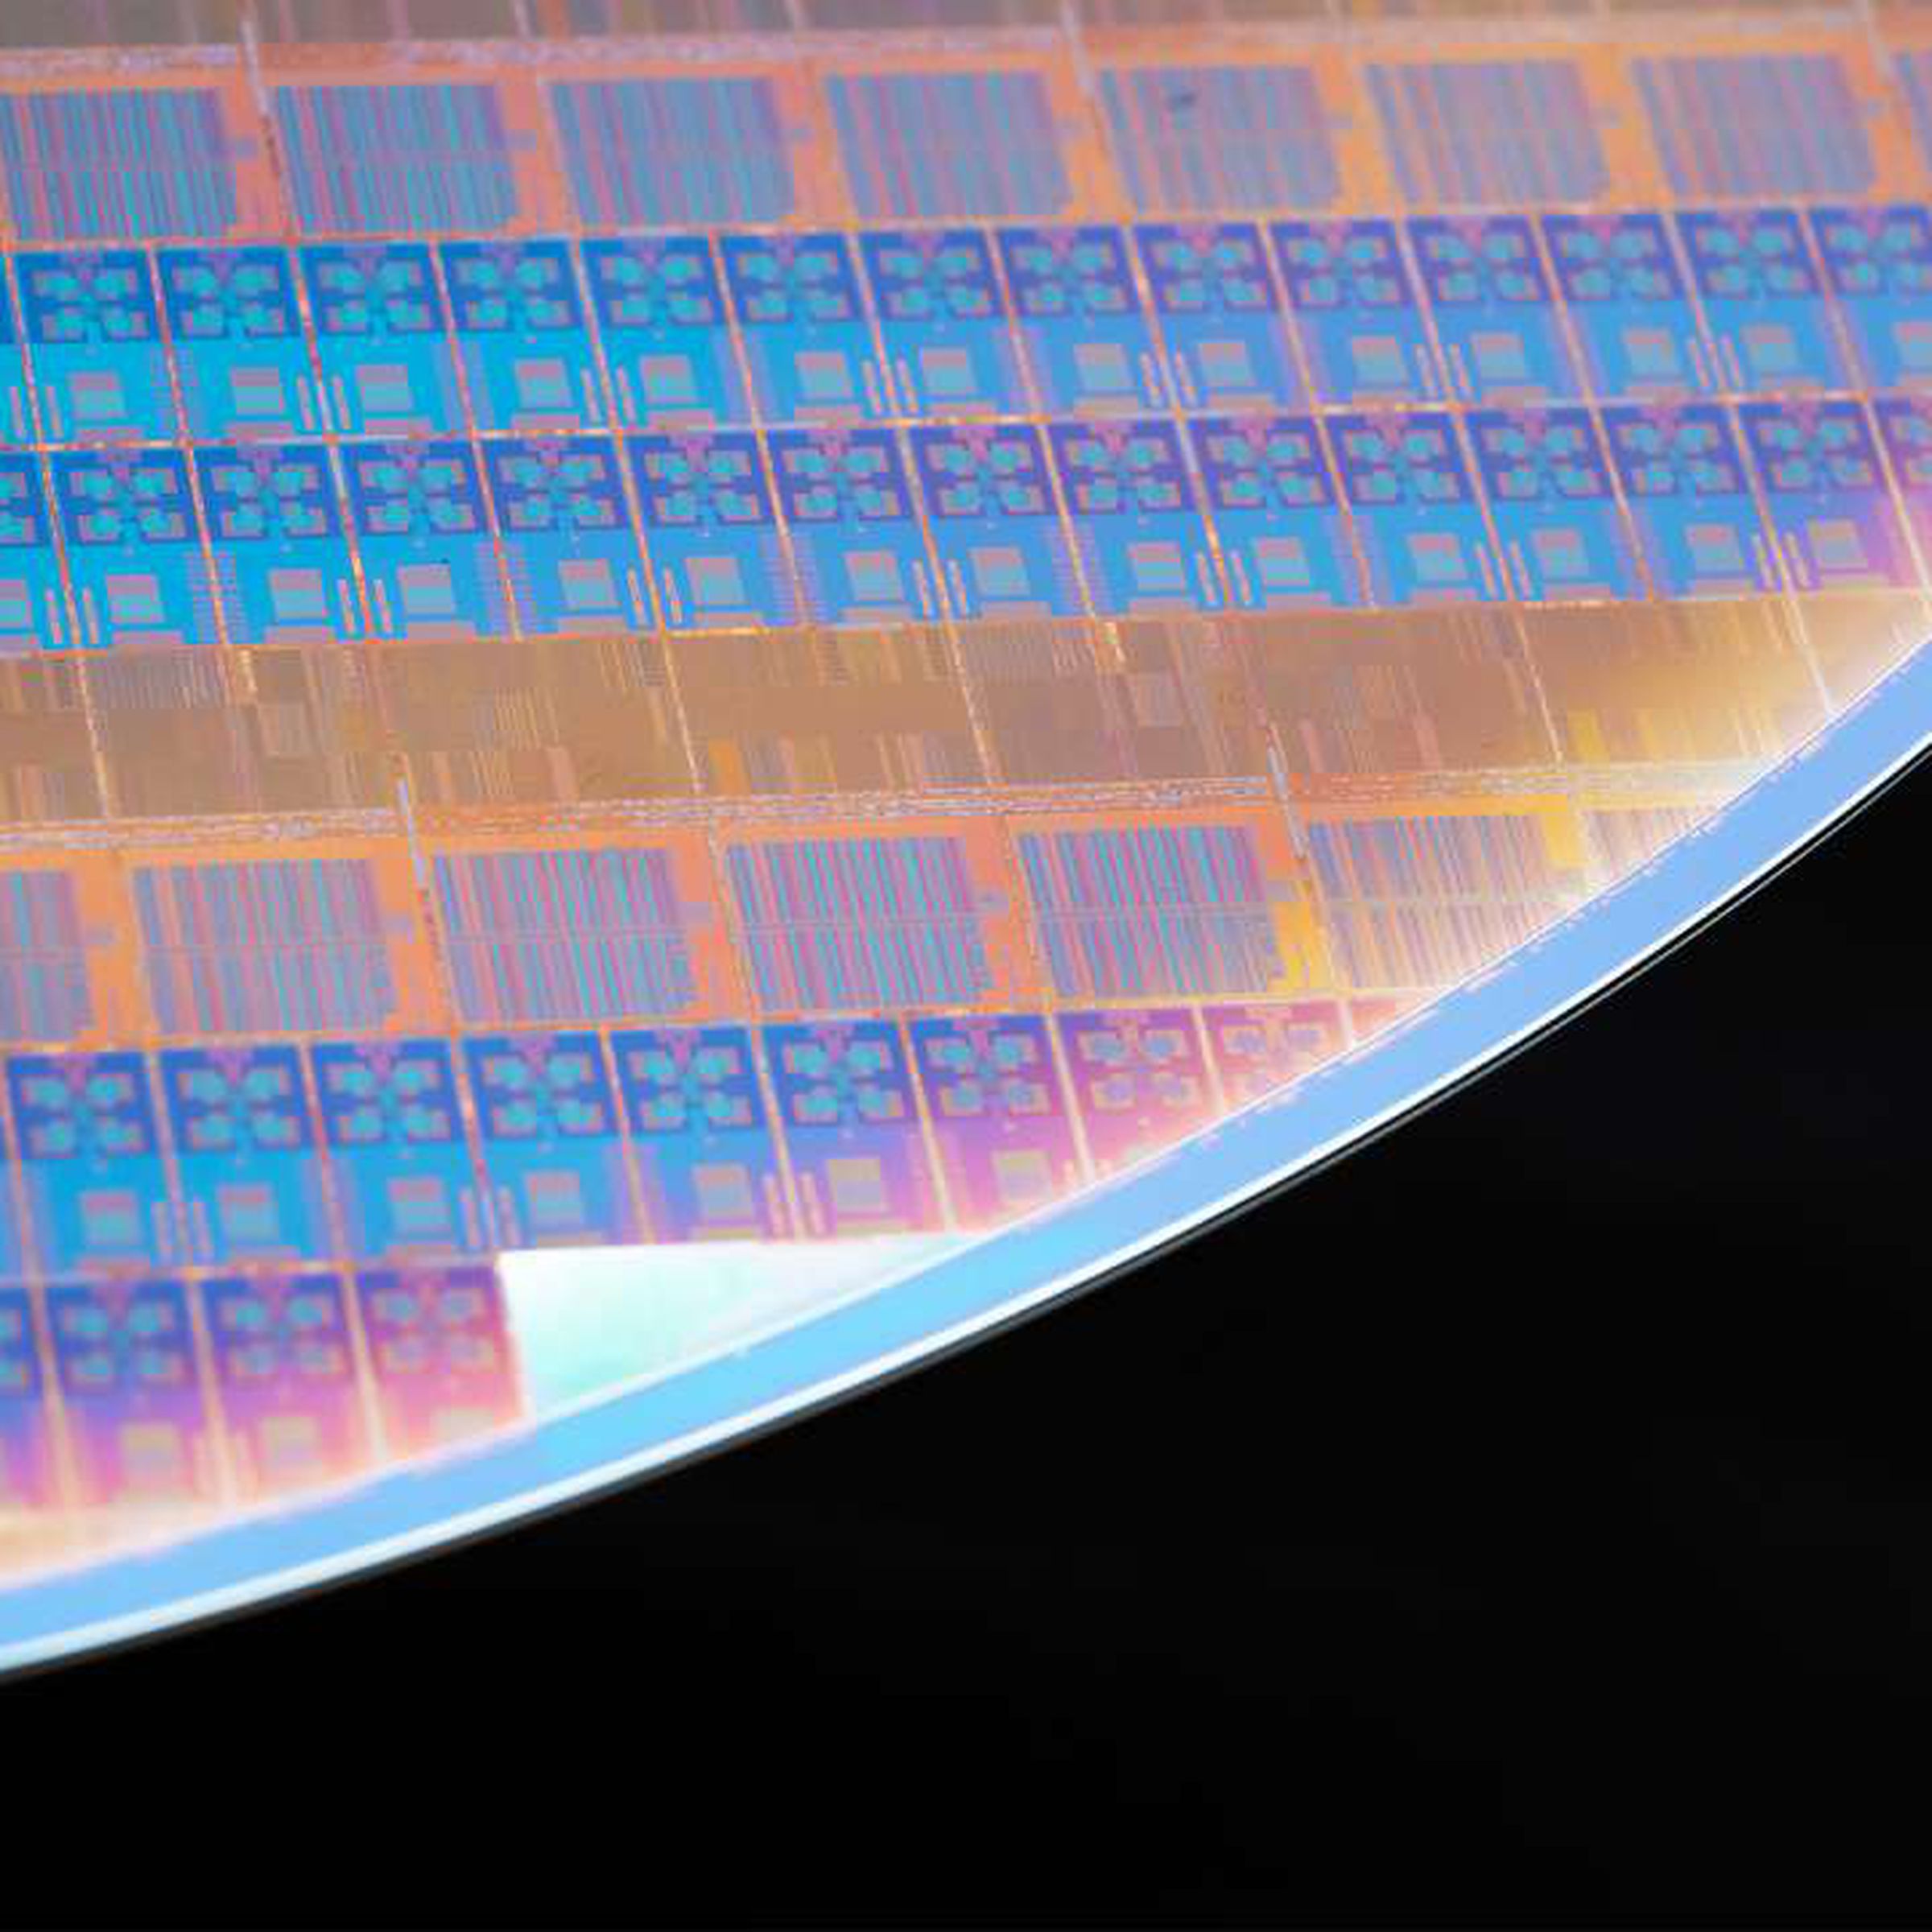 A multicolored image of the Intel Blue Sky Creek test chips.